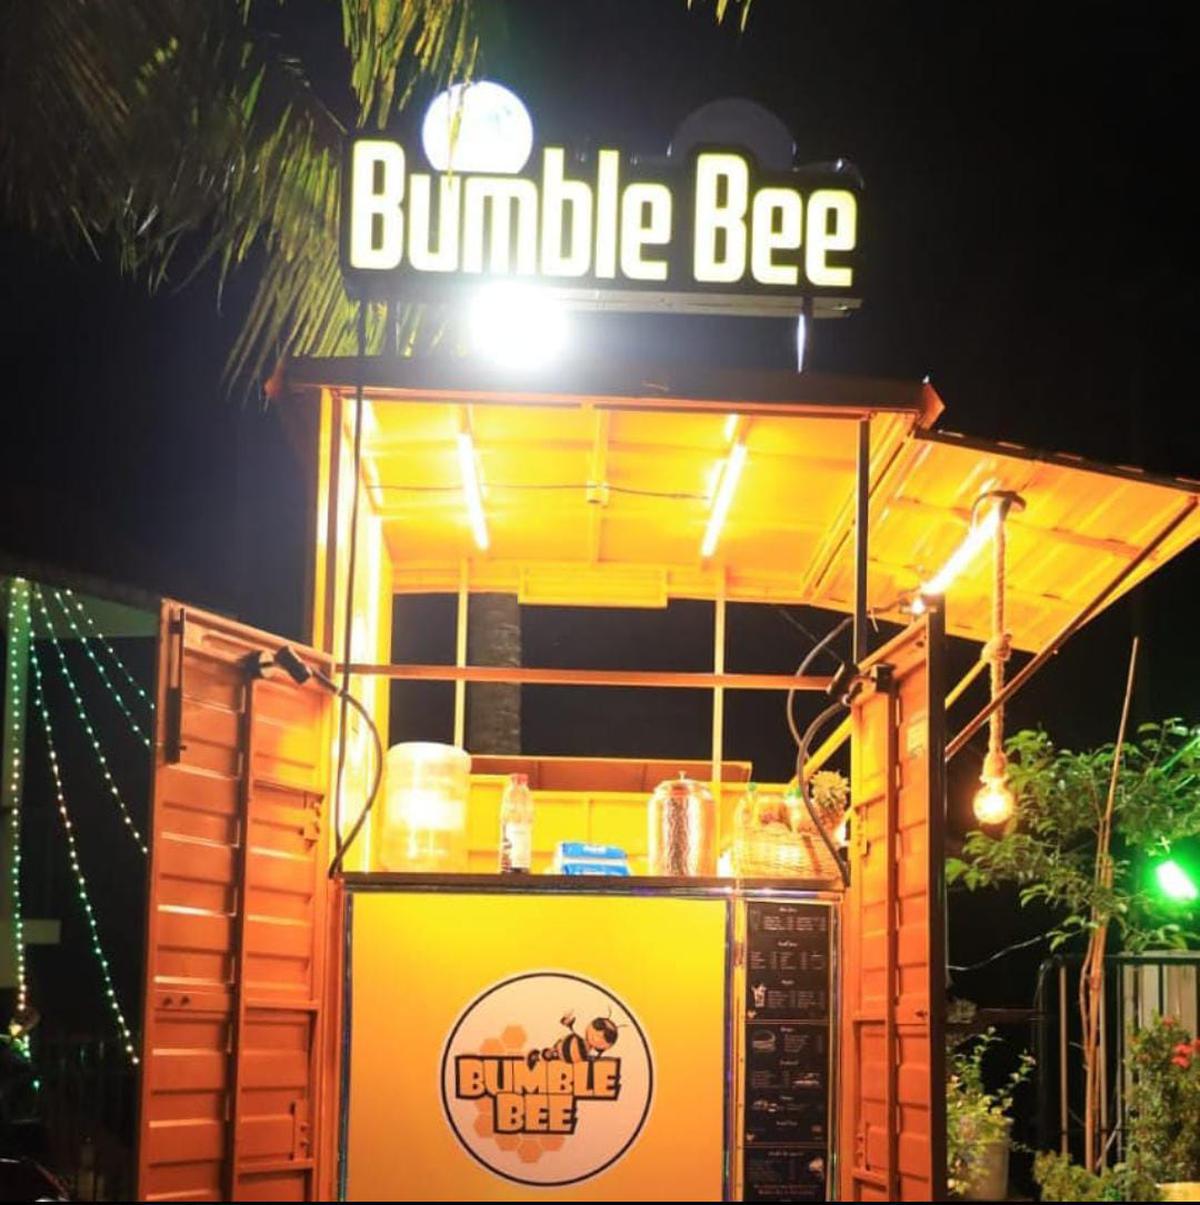 Bumble Bee food truck at Althara Junction in Thiruvananthapuram serves bubble tea